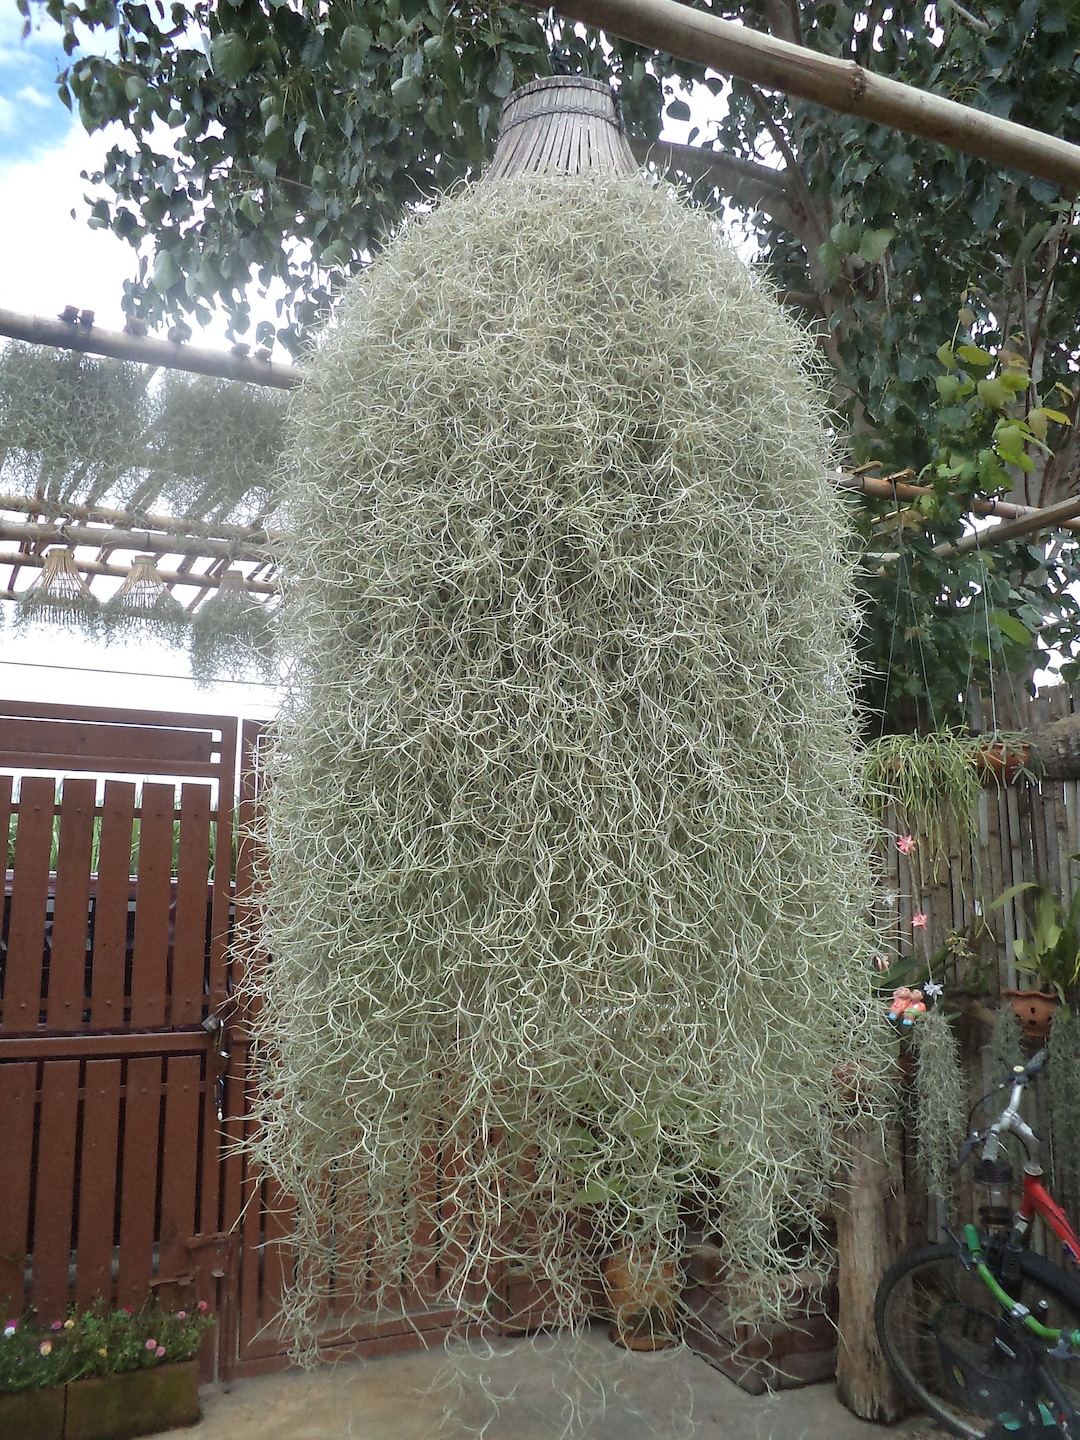 Got this spanish moss as a gift. Any ideas on how to care for it